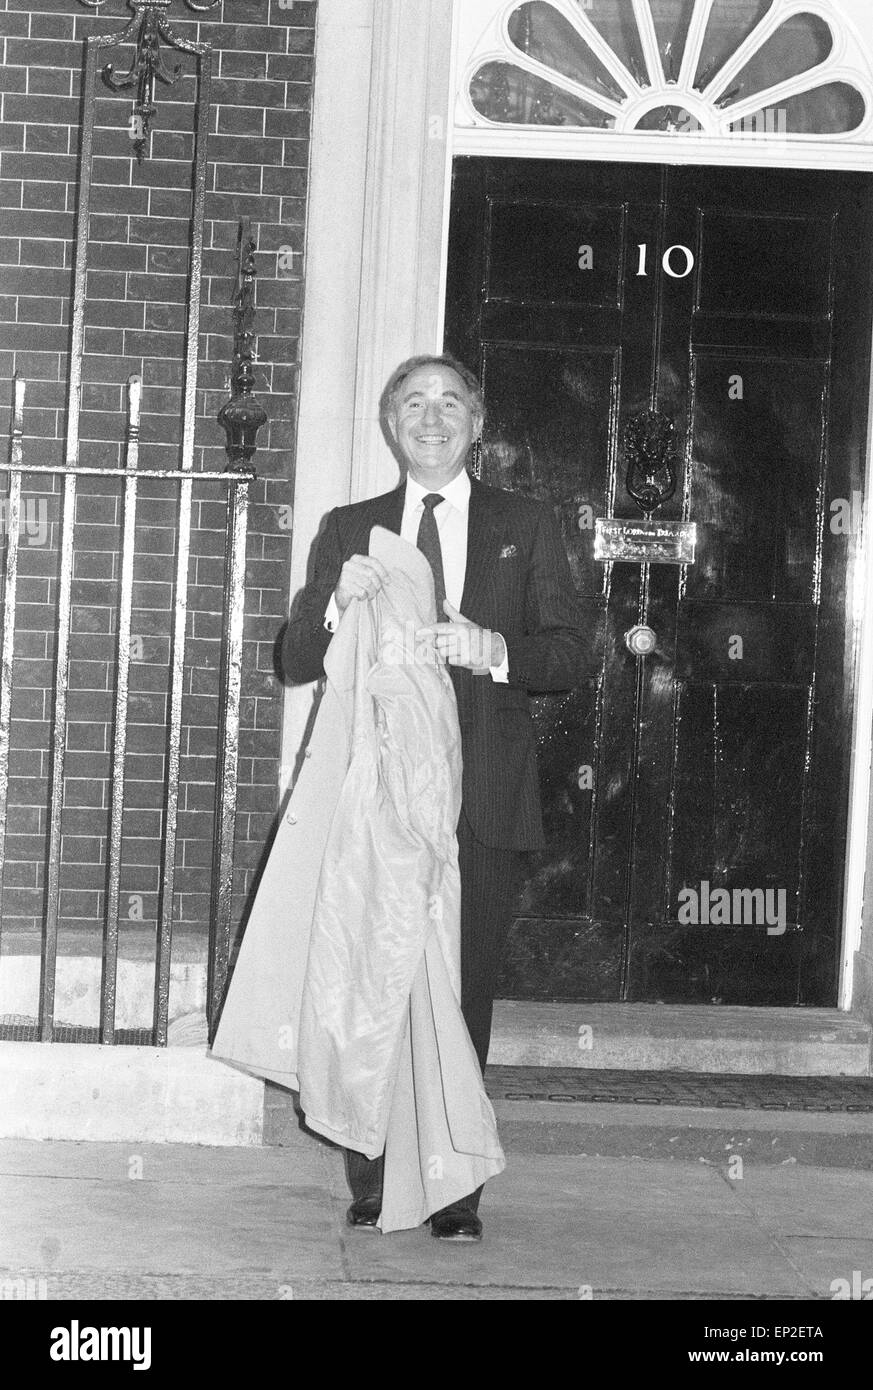 Reception at No. 10 Downing Street, London, attended by cast members of BBC TV Programme 'Yes Minister', May 1983. Pictured: Nigel Hawthorne a.k.a. Sir Humphrey Appleby. Stock Photo